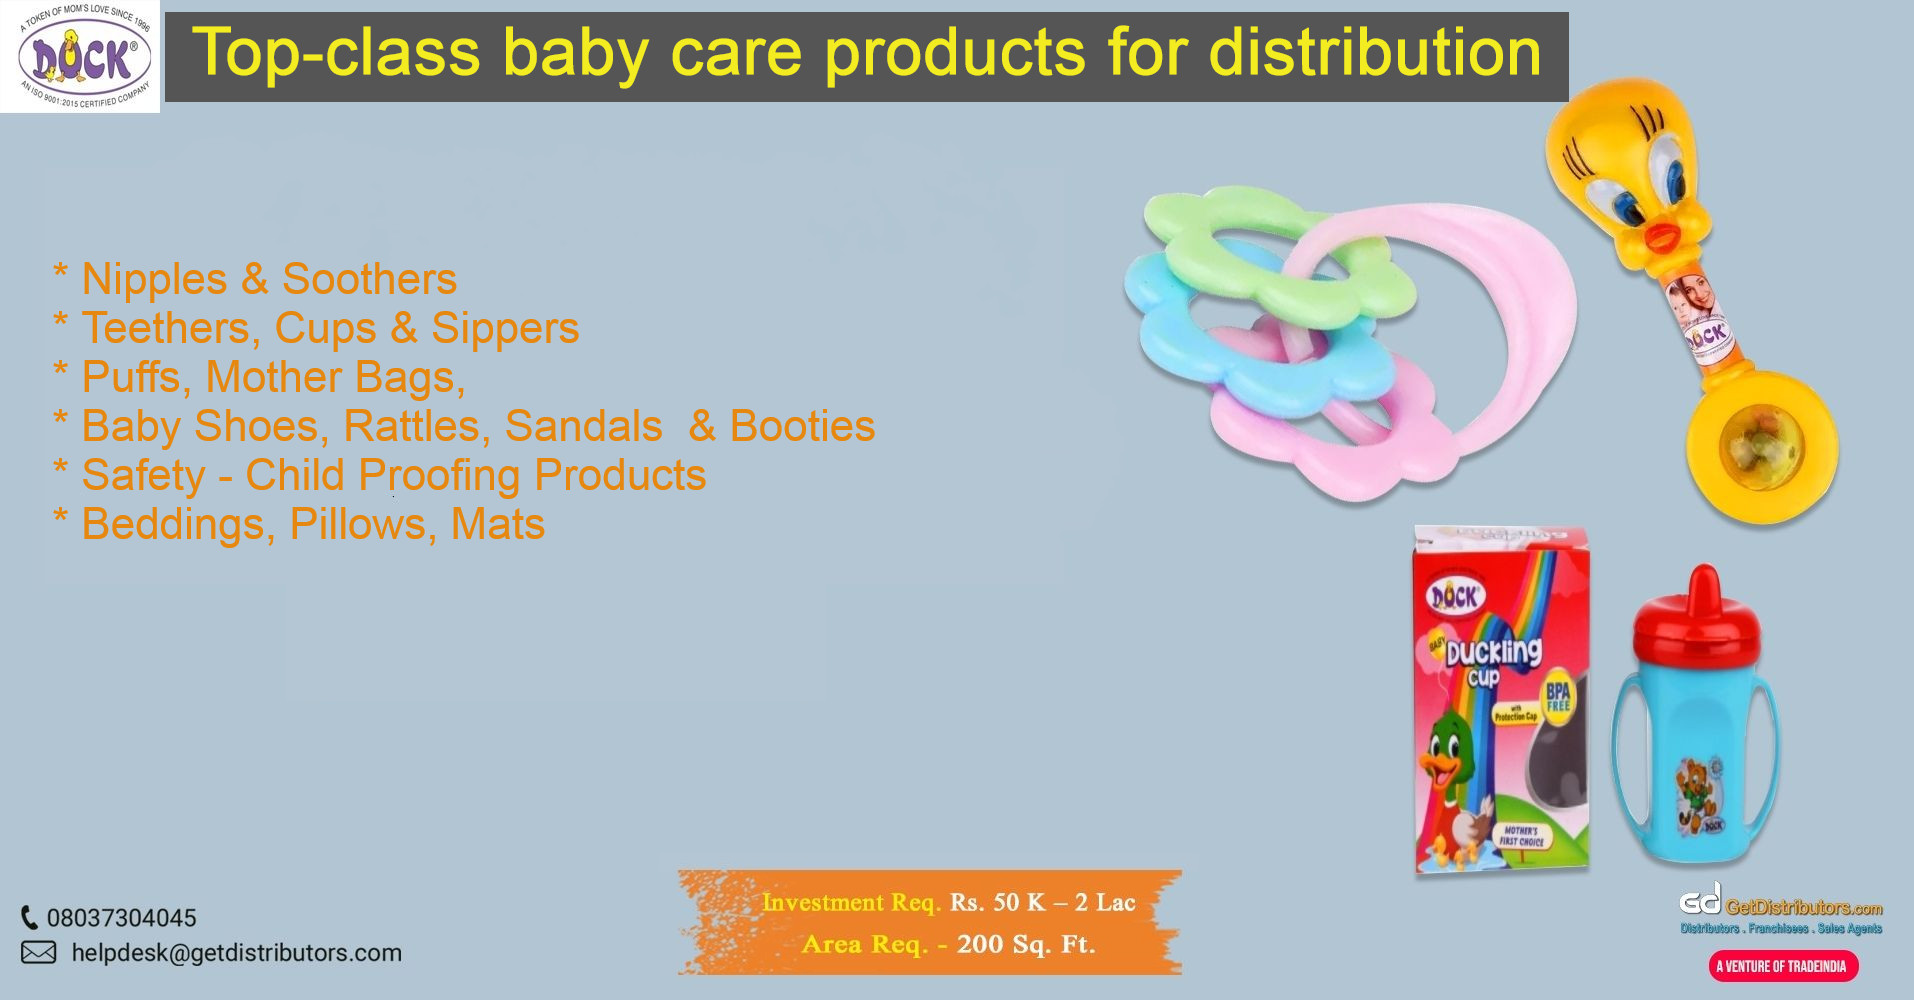 Top-class baby care products for distribution